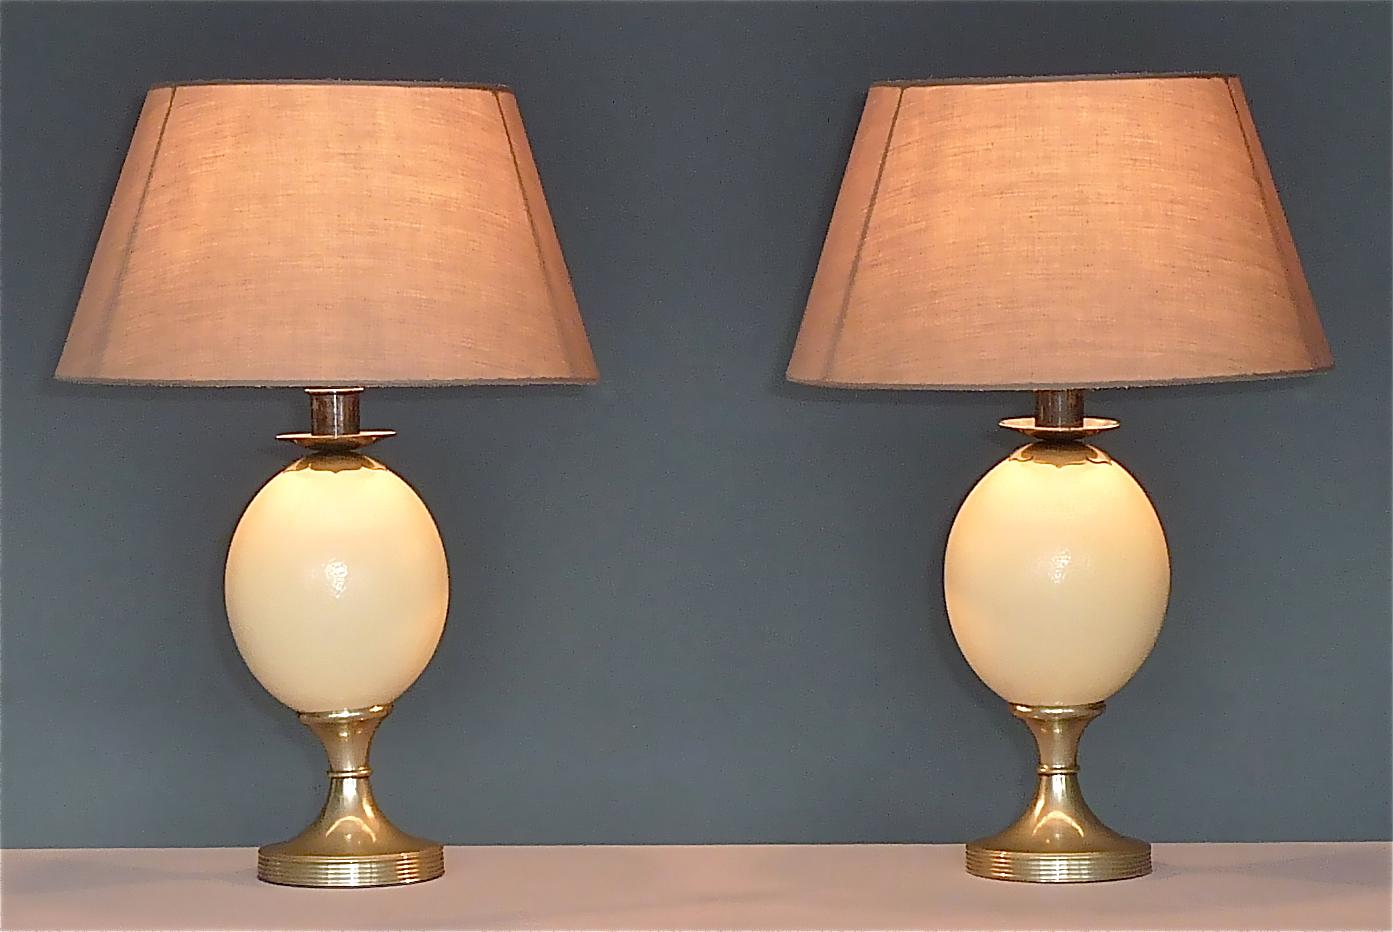 Beautiful and signed pair of ostrich egg table lamps designed and manufactured by Anthony Redmile, England, circa 1970s. The classical table lamps have each a metal base, an ostrich egg, a patinated silvered metal fitting for one E27 standard screw